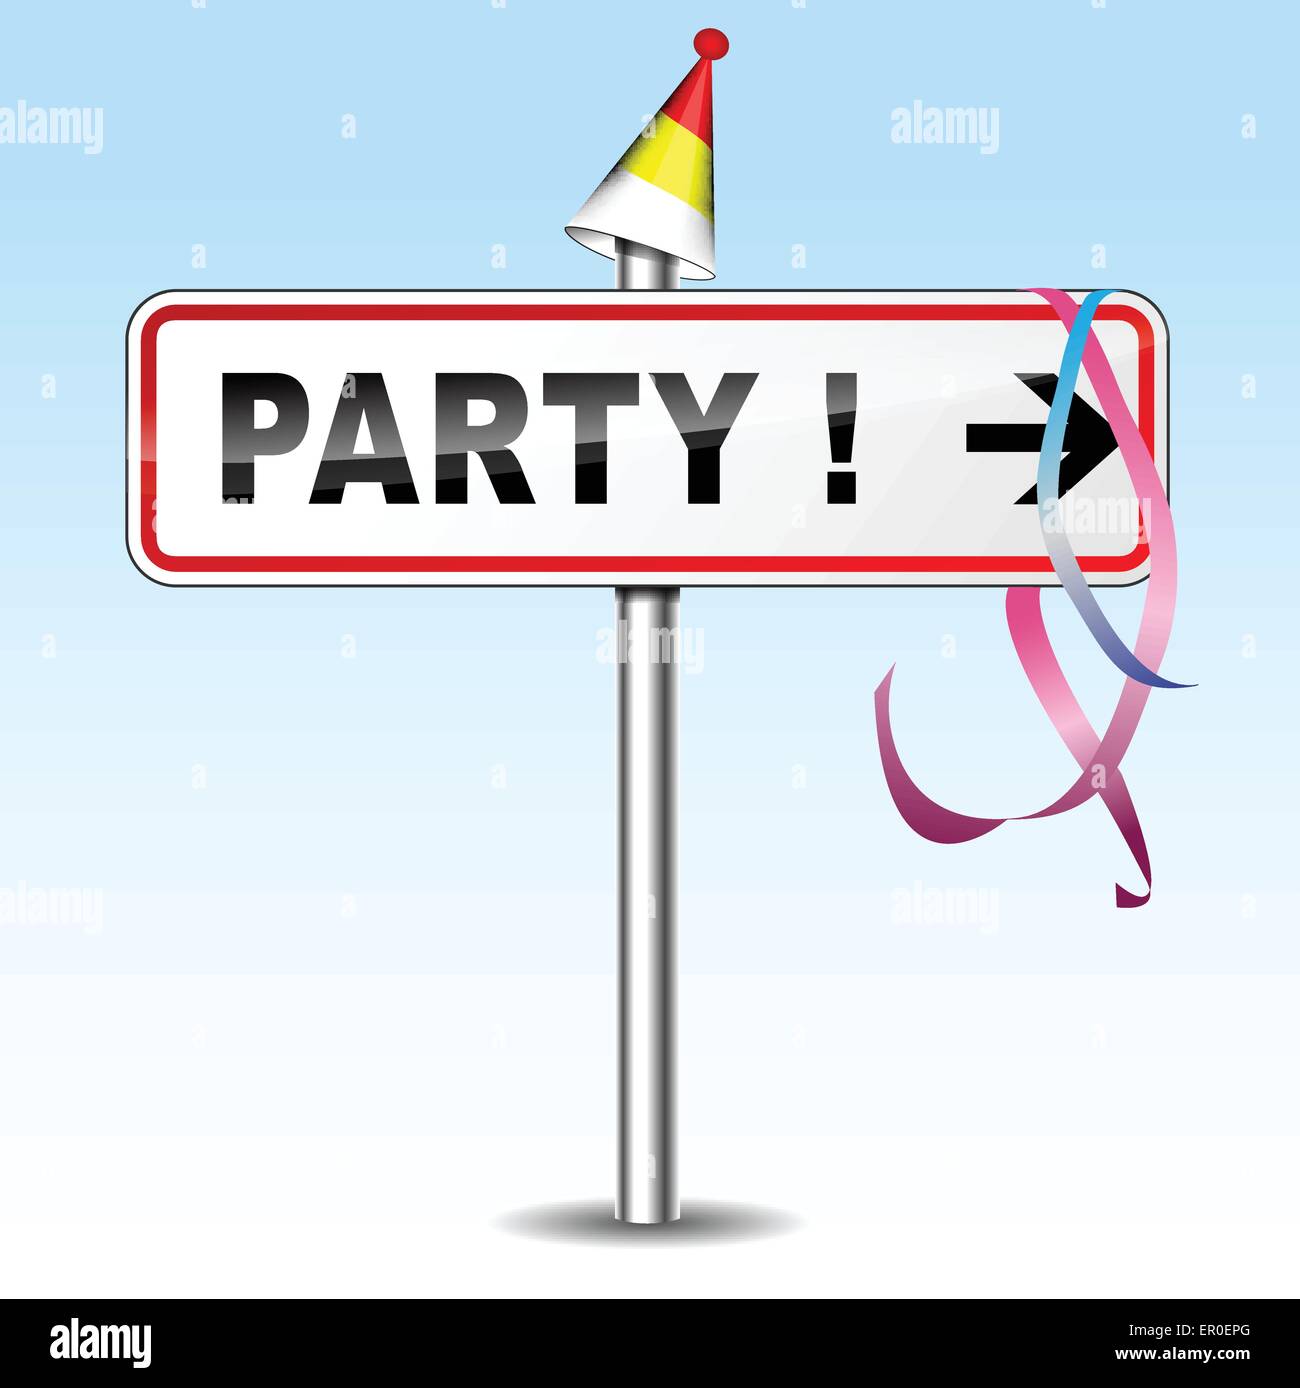 Illustration of party sign on sky background Stock Vector